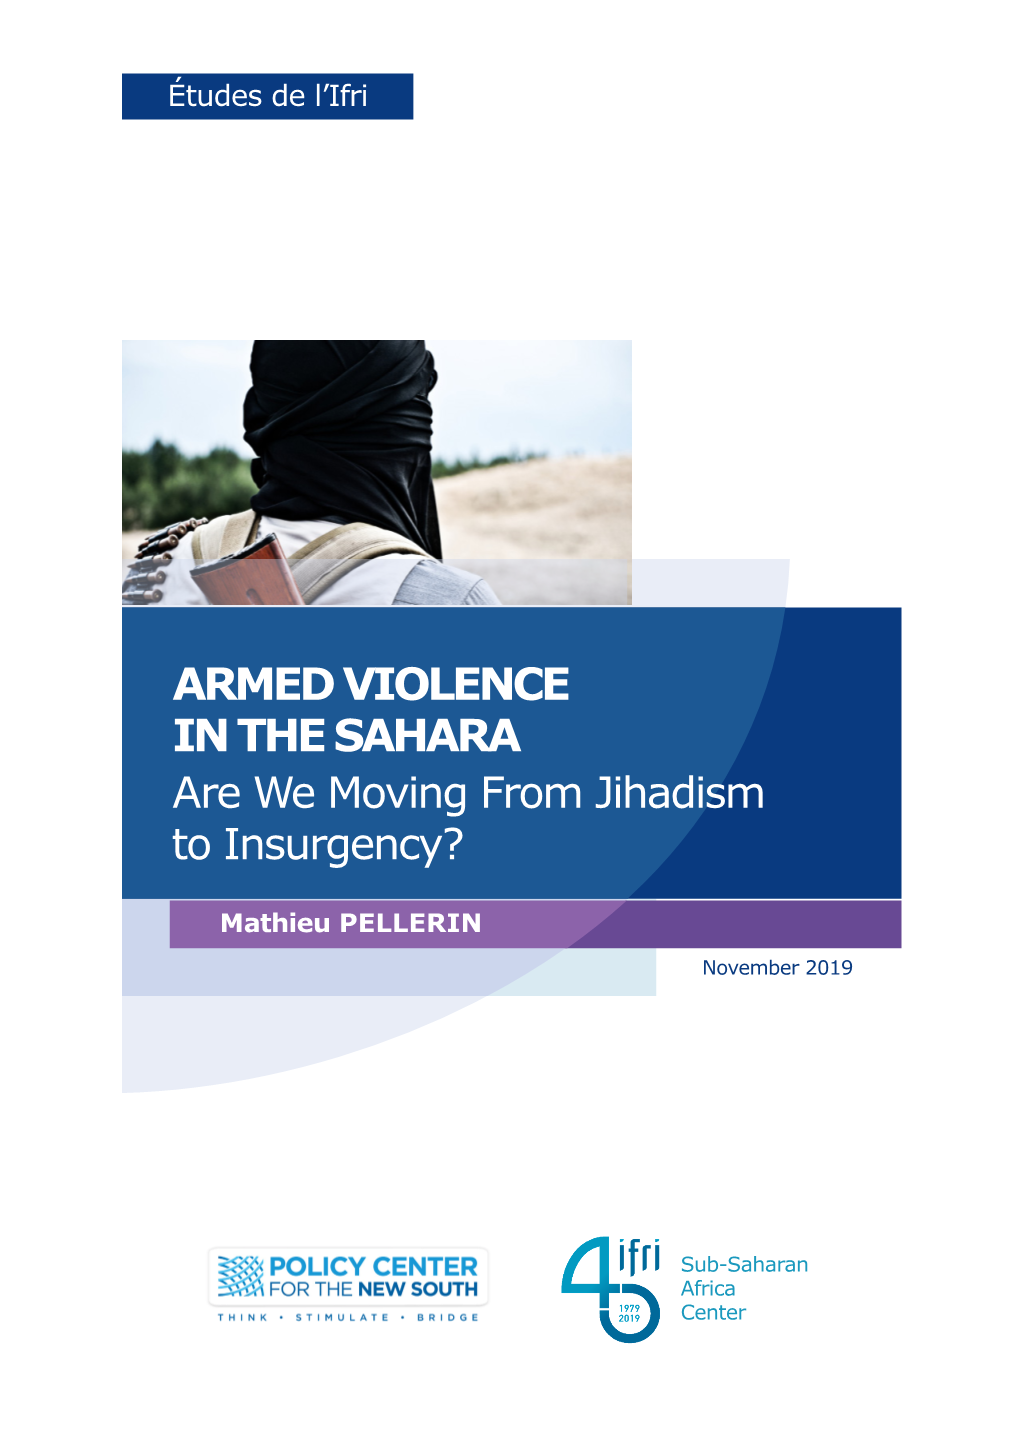 Armed Violence in the Sahara. Are We Moving from Jihadism to Insurgency?”, Études De L’Ifri, Ifri, November 2019